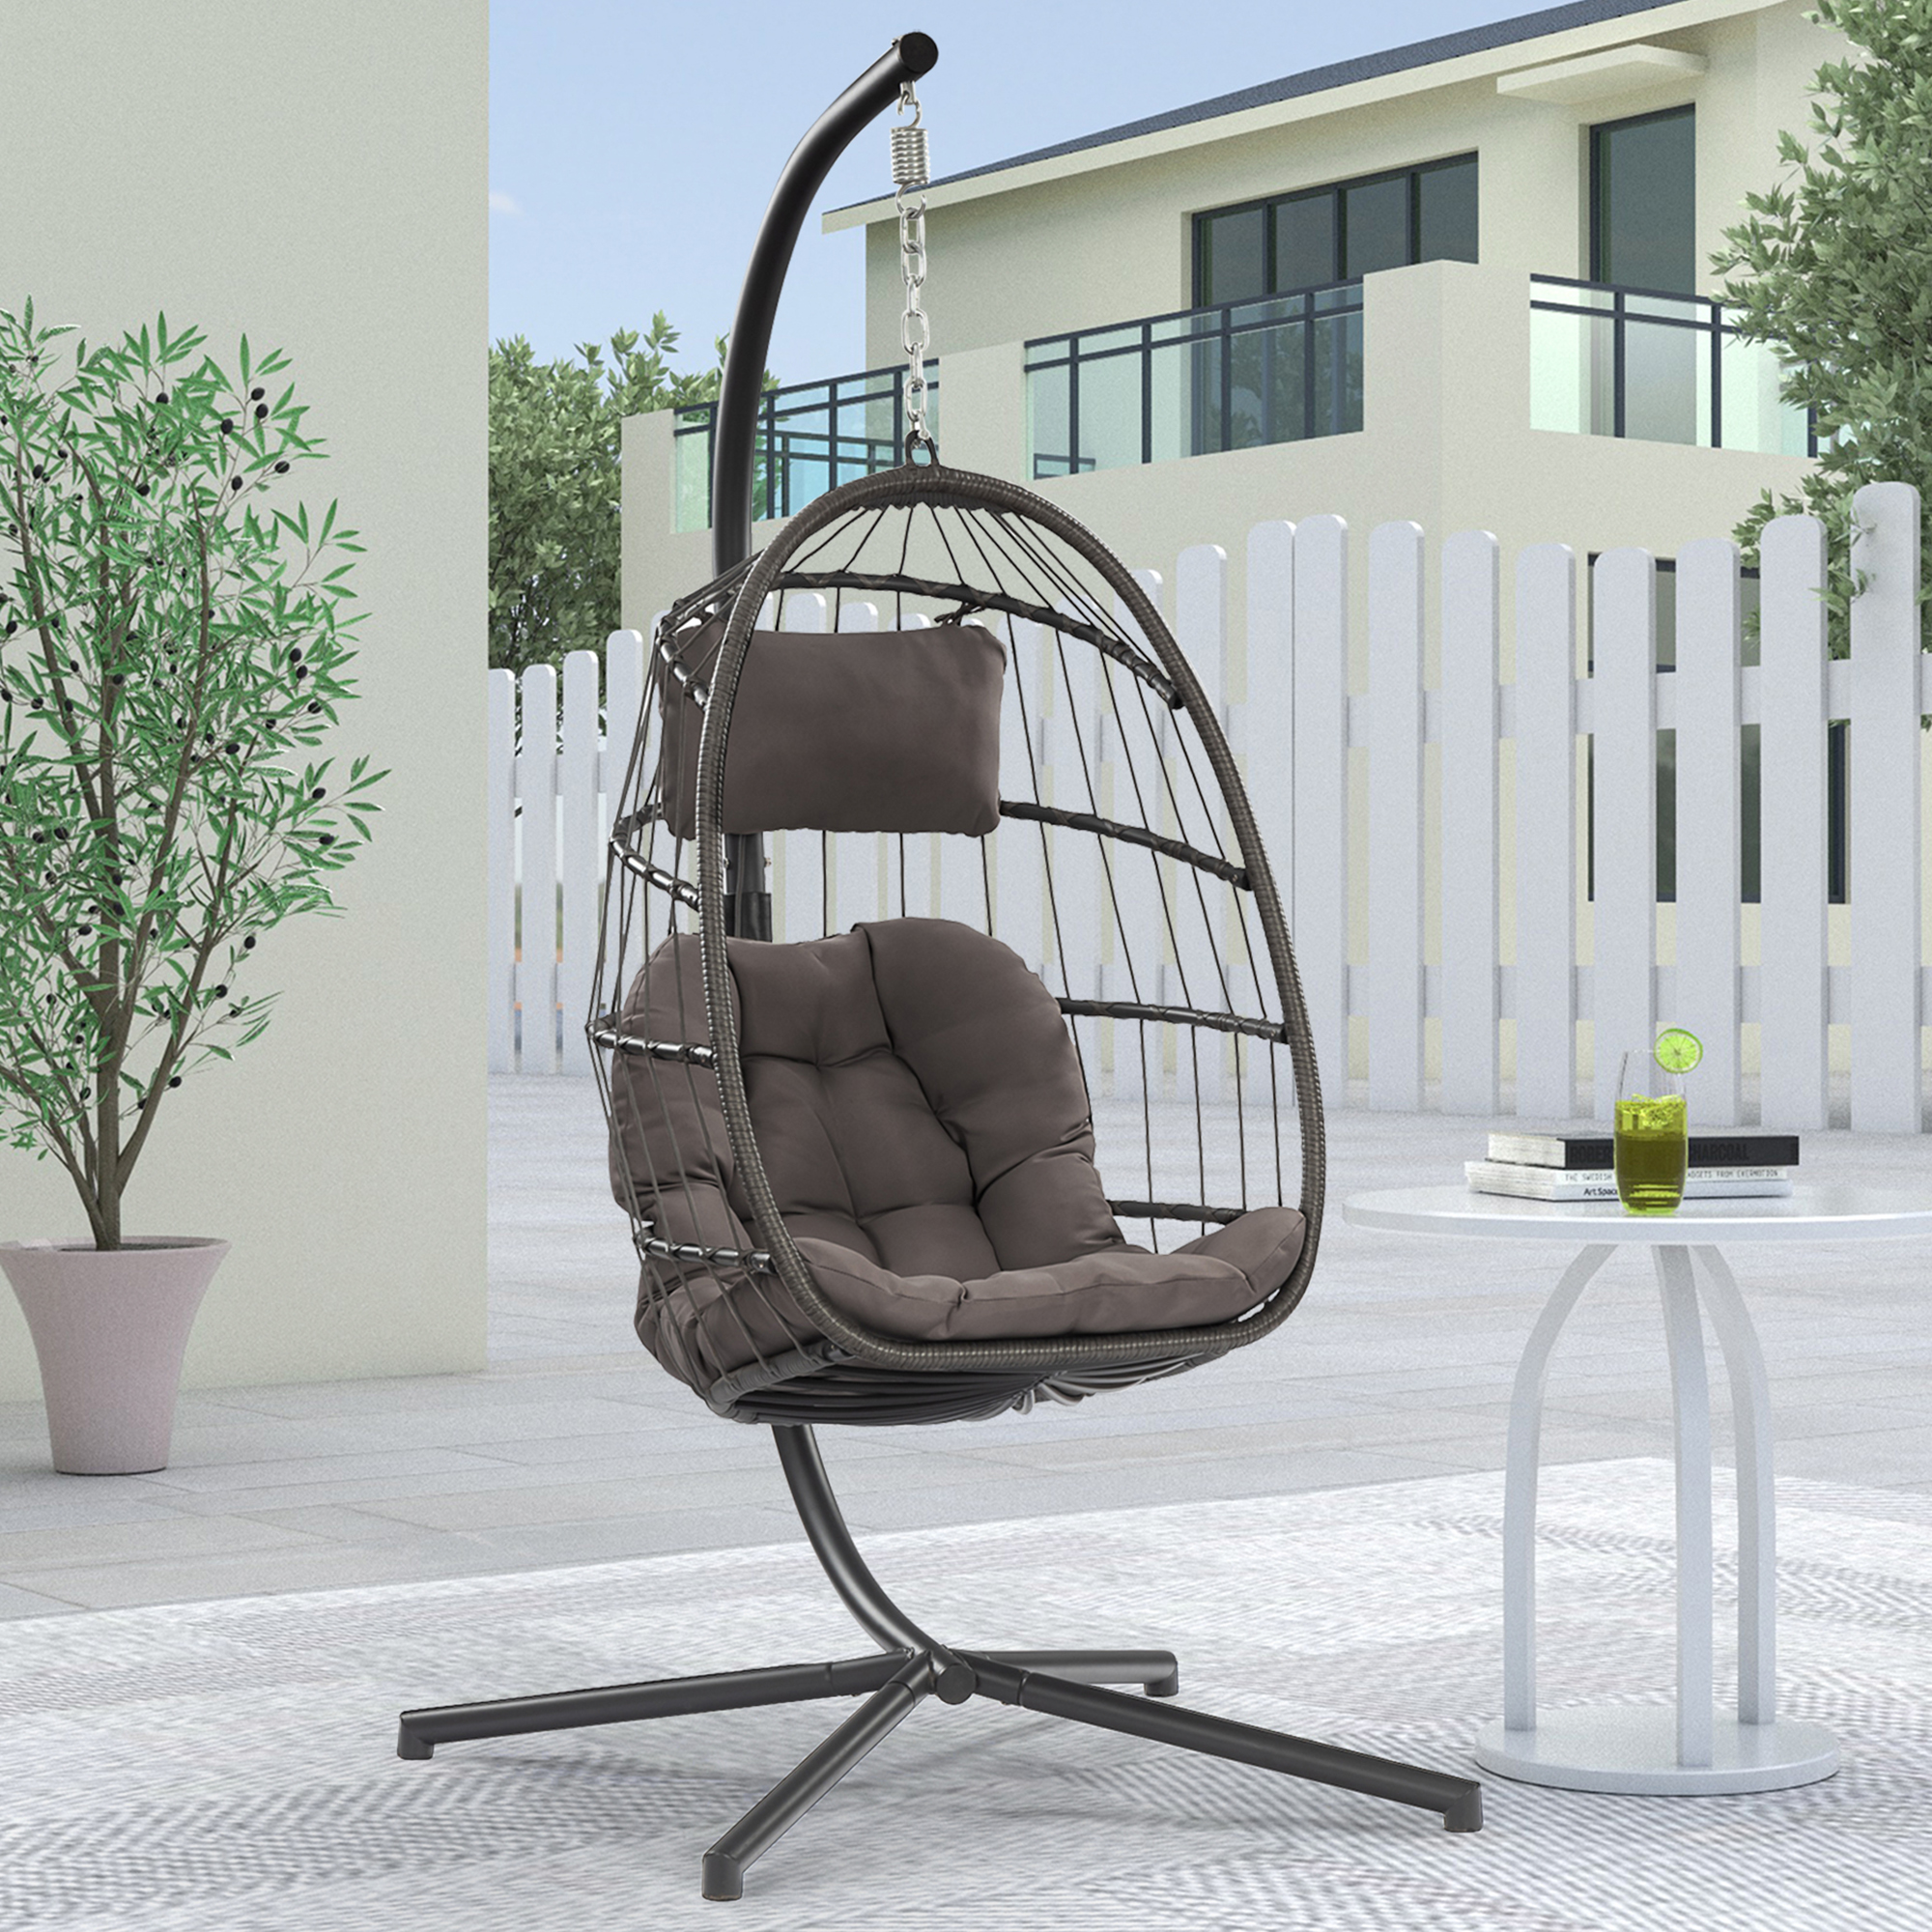 Hanging Egg Chair with Steel Stand and Fluffy Cushion, Lounge Wicker Iron Swing Chairs for Indoor Outdoor Patio Garden - image 1 of 8